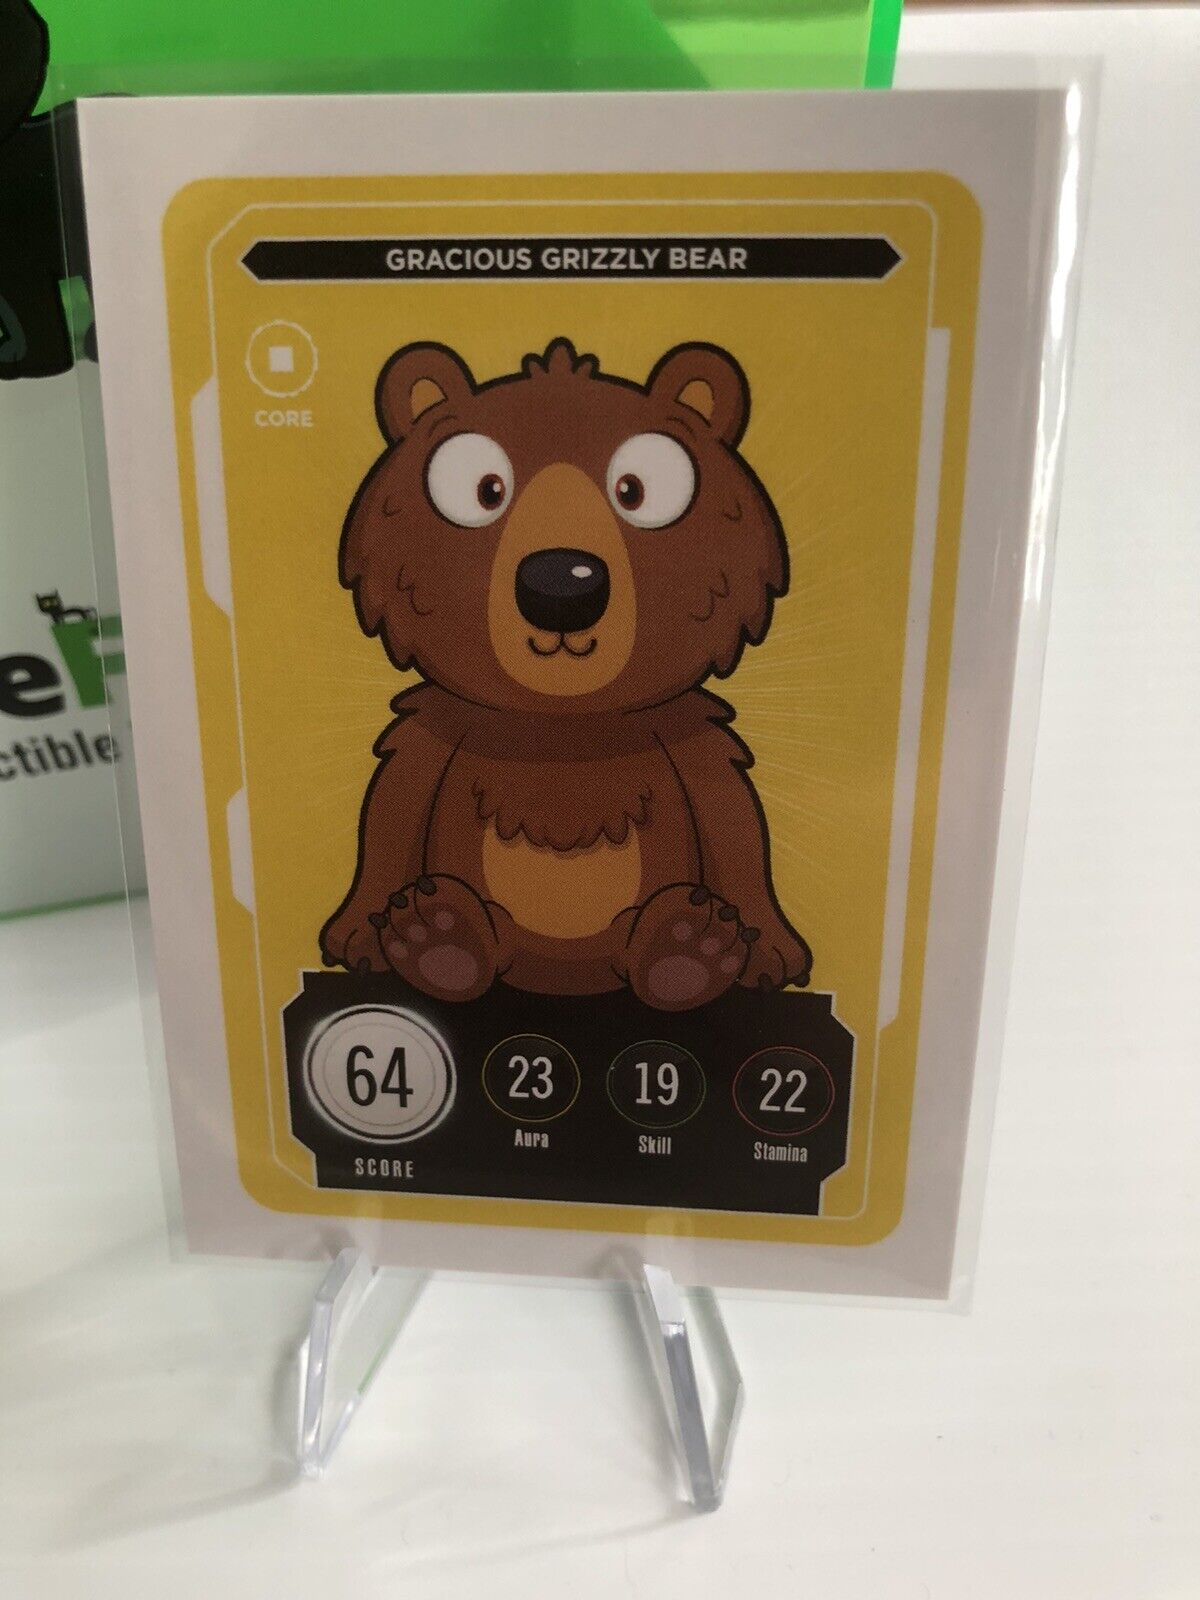 Gracious Grizzly Bear Core VeeFriends Compete & Collect ZeroCool Card Series 2